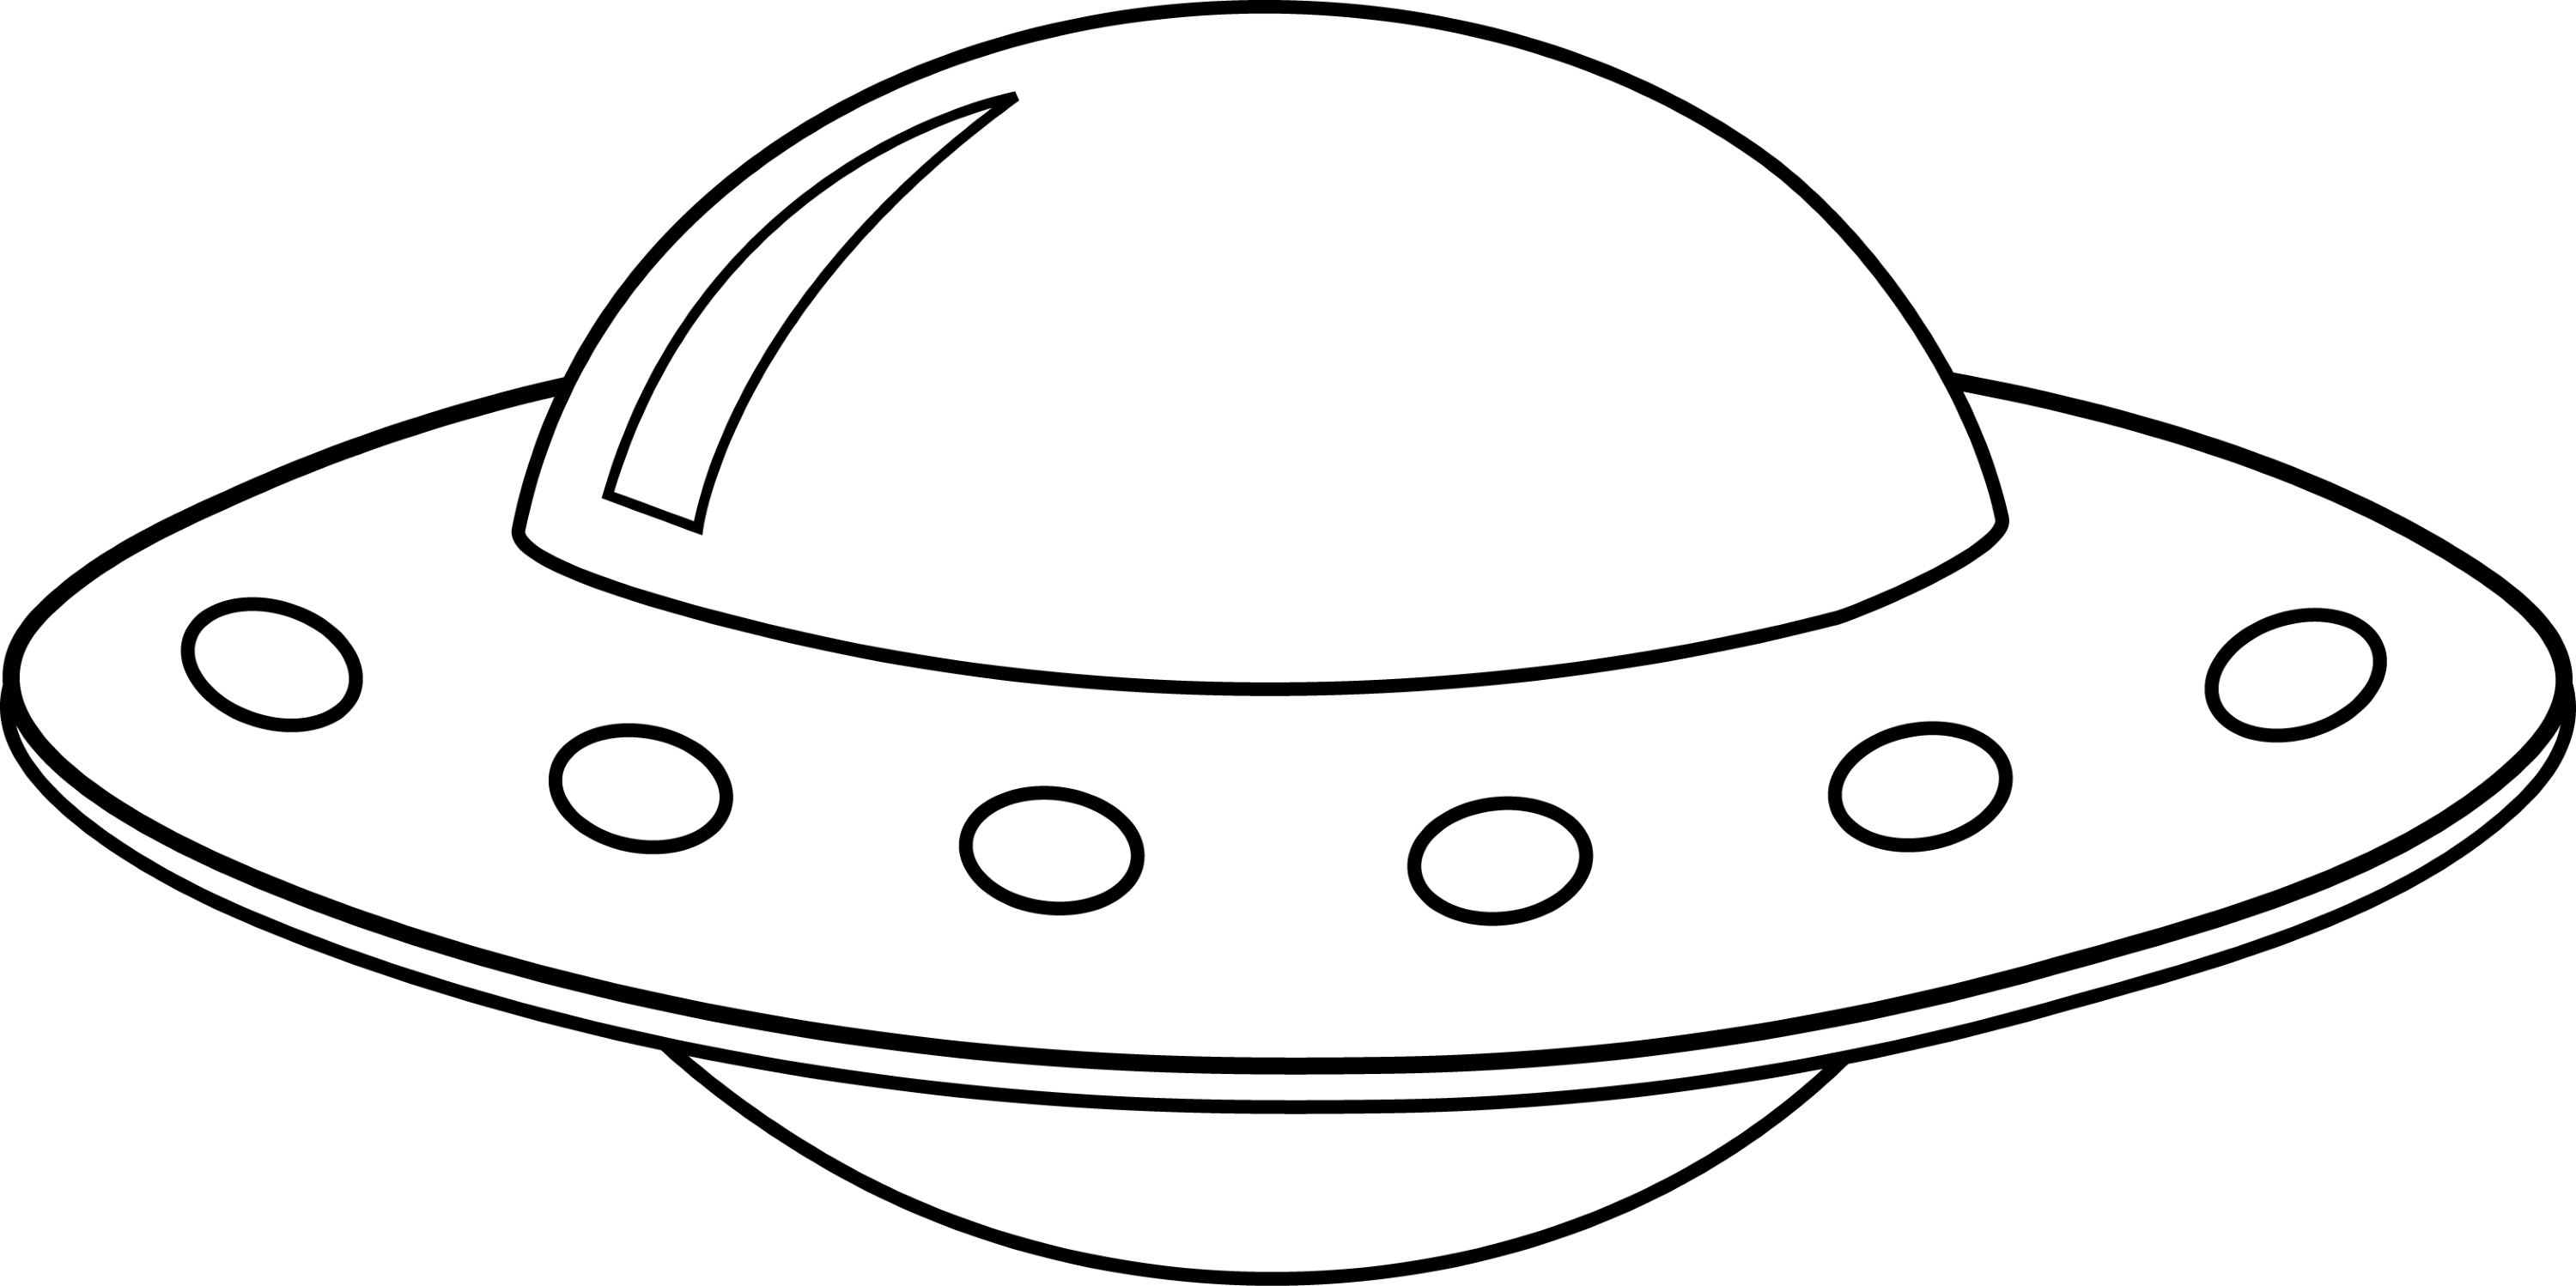 pin-by-connie-shearing-on-ink-spaceship-clipart-clip-art-spaceship